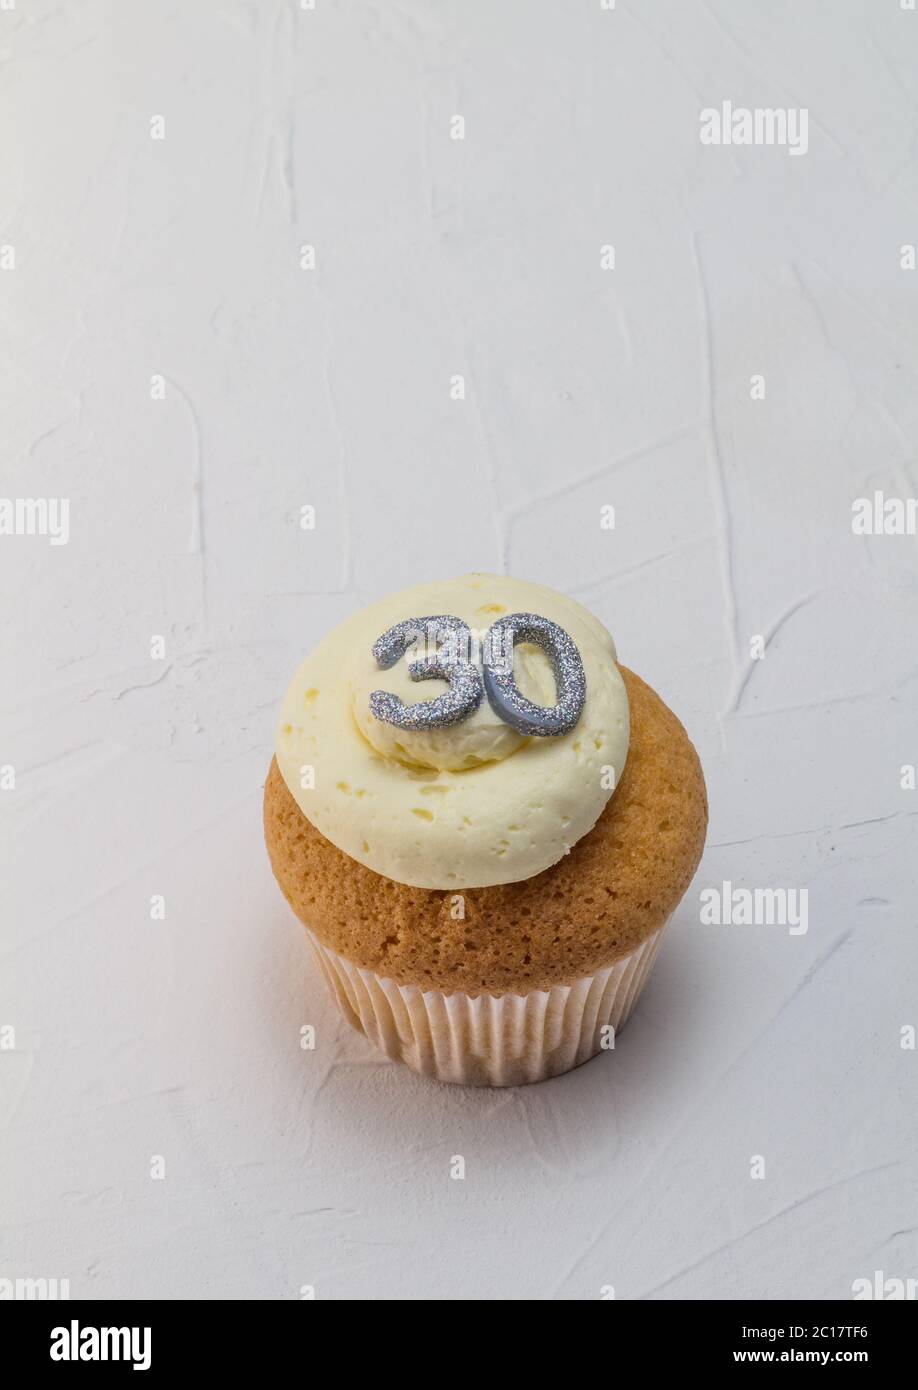 Single vanilla sponge cup cake with silver glitter number 30 on top of creamy white frosting isolate Stock Photo